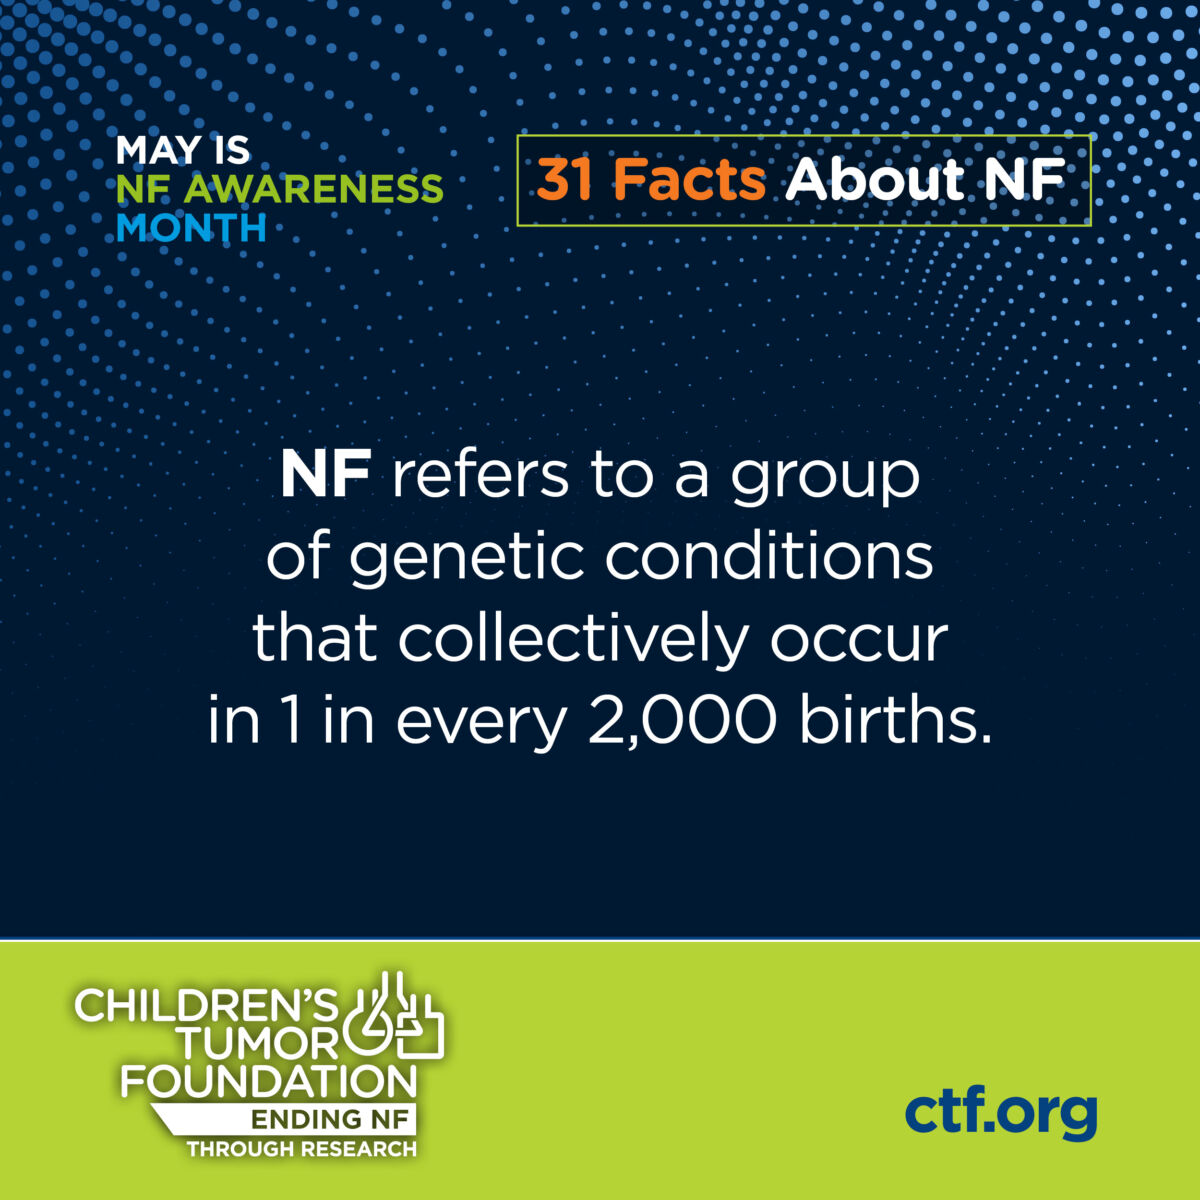 Informative graphic highlighting neurofibromatosis (nf) awareness month with a fact about its prevalence.